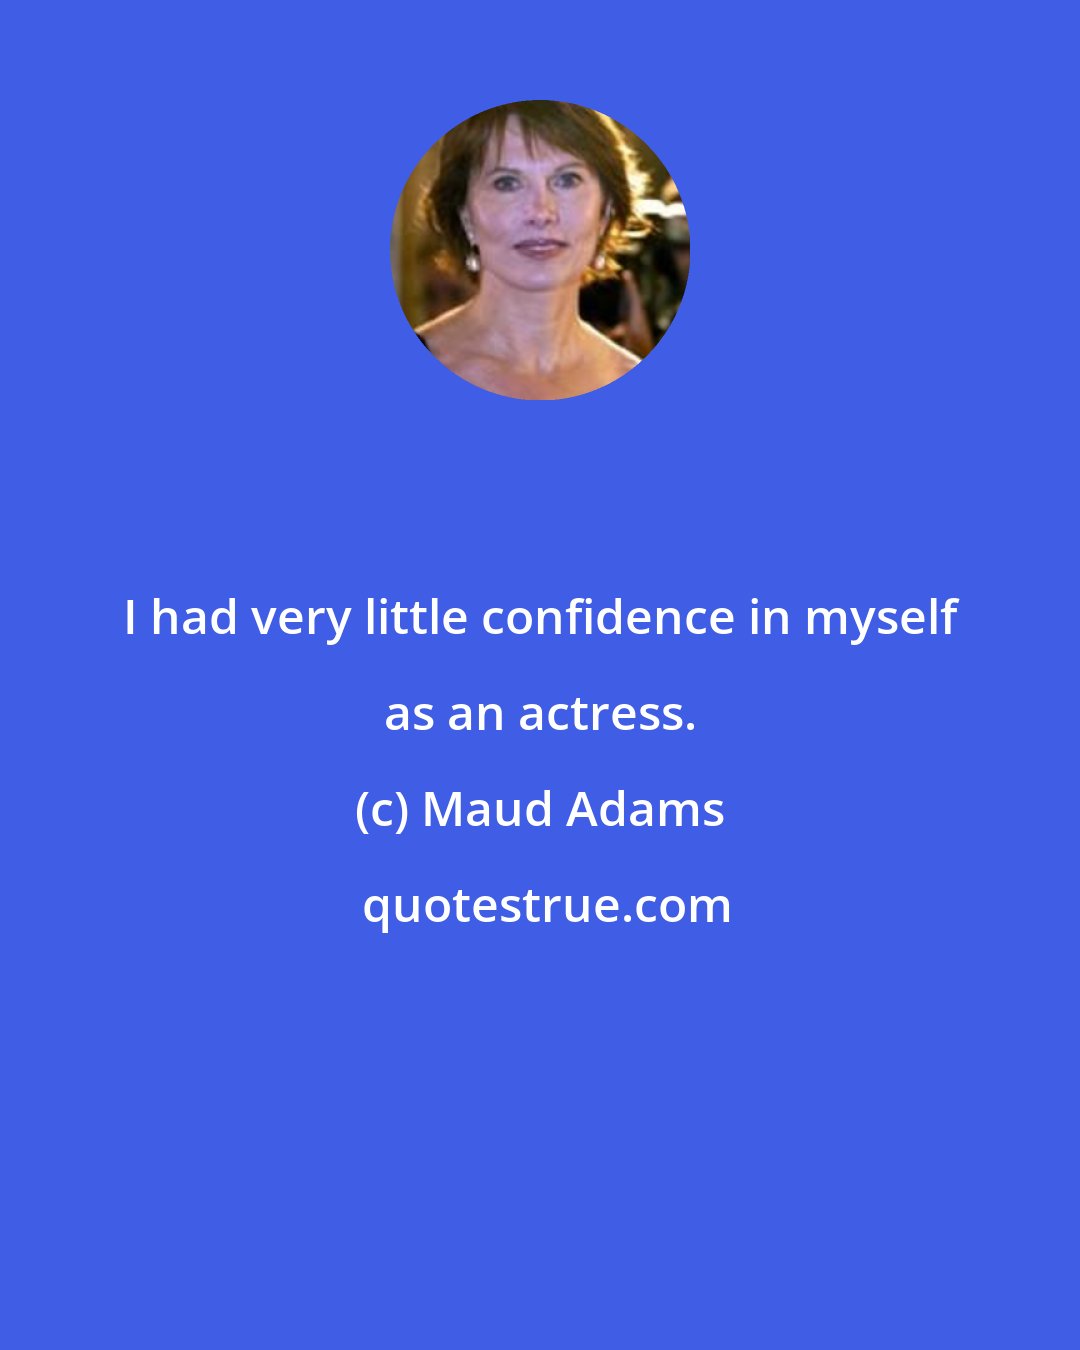 Maud Adams: I had very little confidence in myself as an actress.